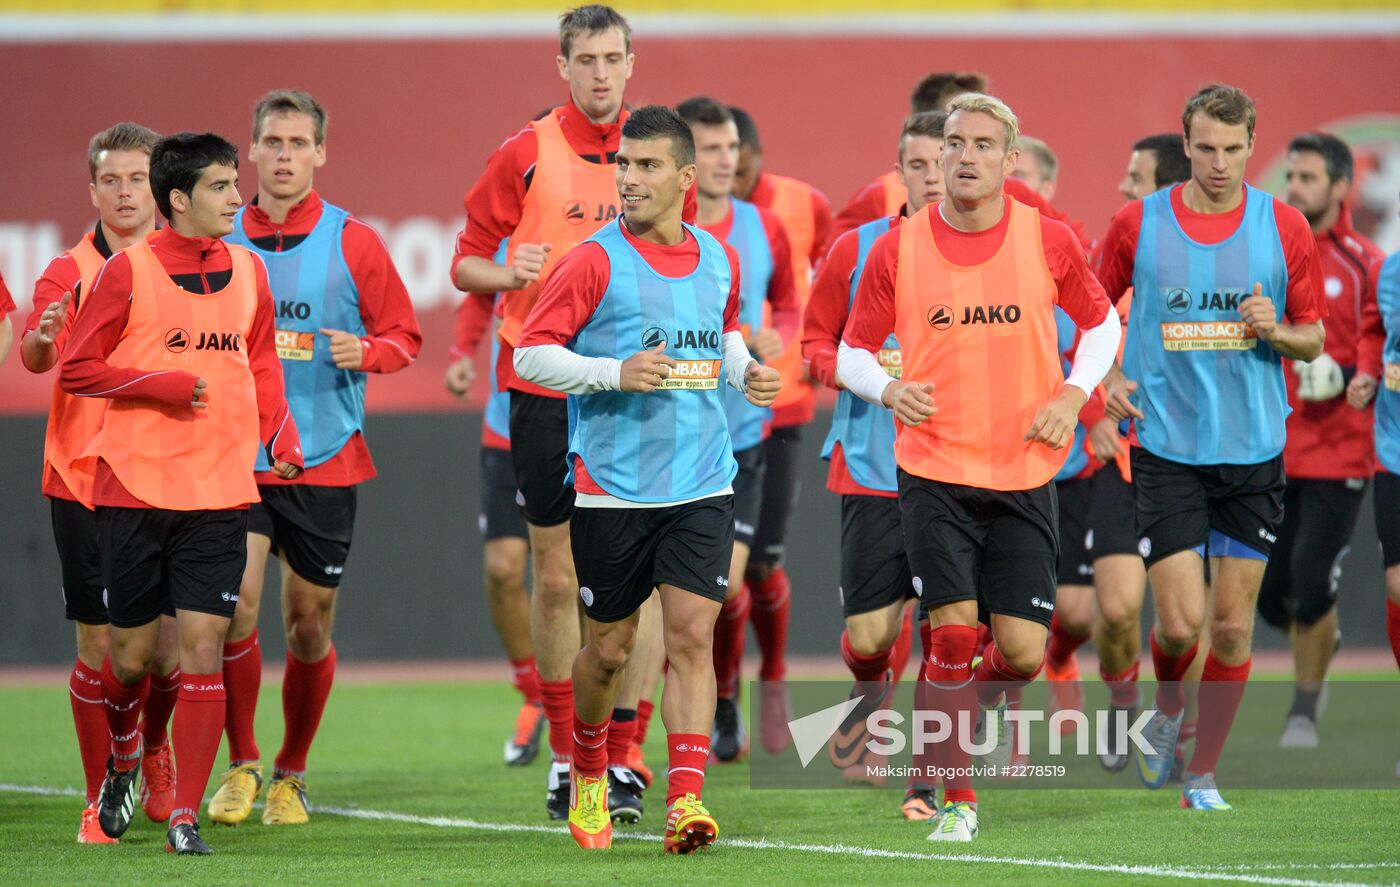 Football. Pre-match training session of Luxembourg national team